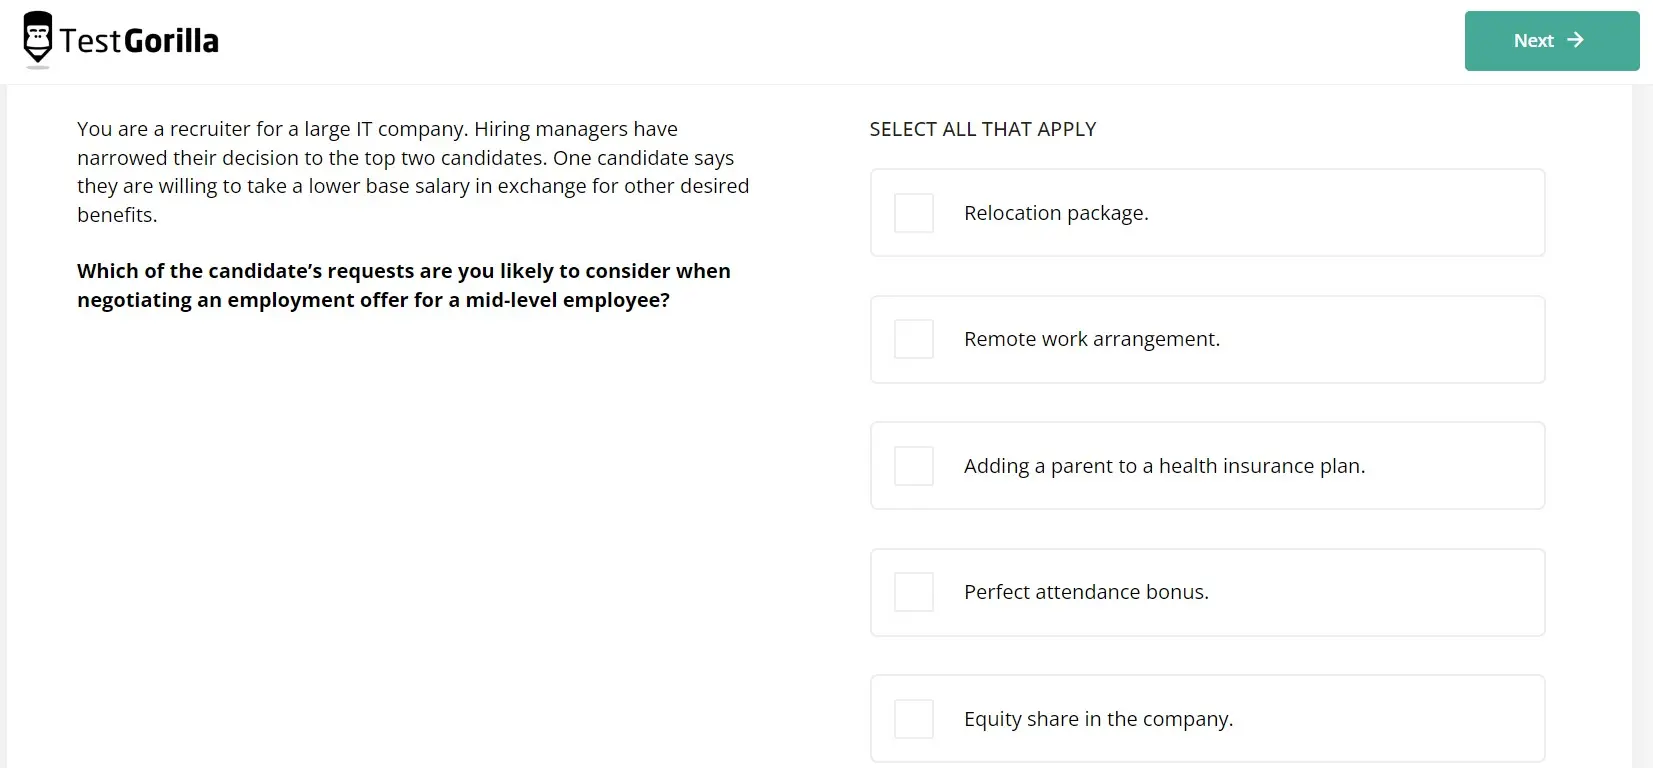 Example question of Talent Acquisition test by TestGorilla